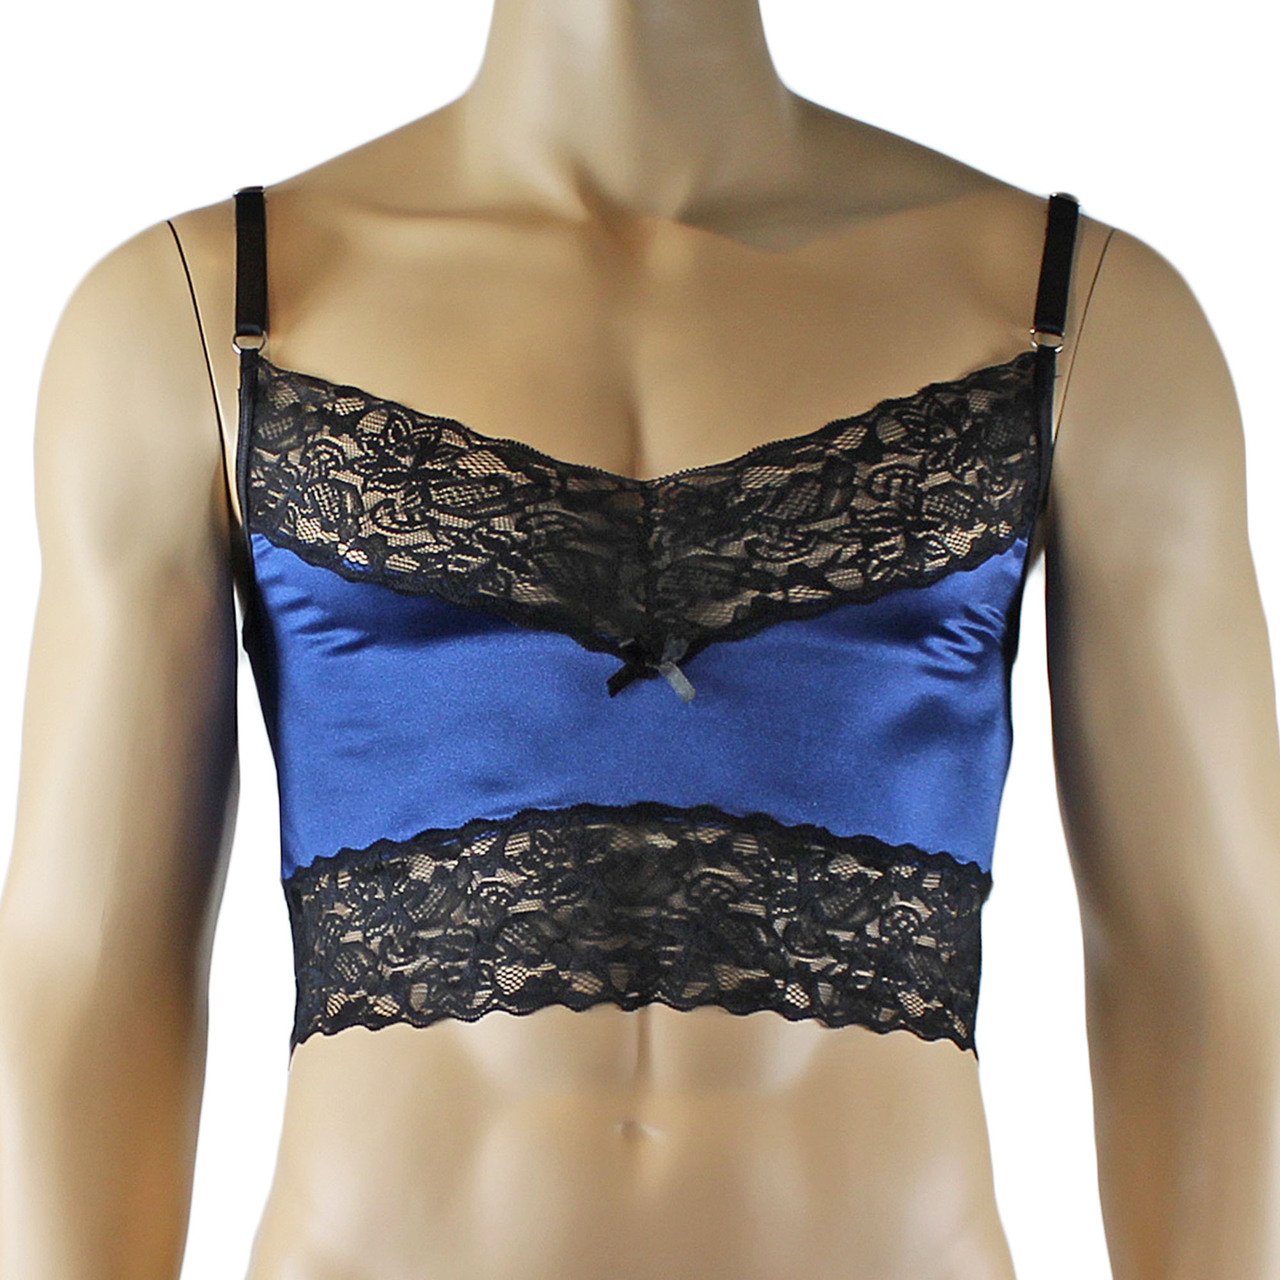 Mens Glamour Camisole Top with High Waist Thong- Sizes up to 3XL (navy and other colours)